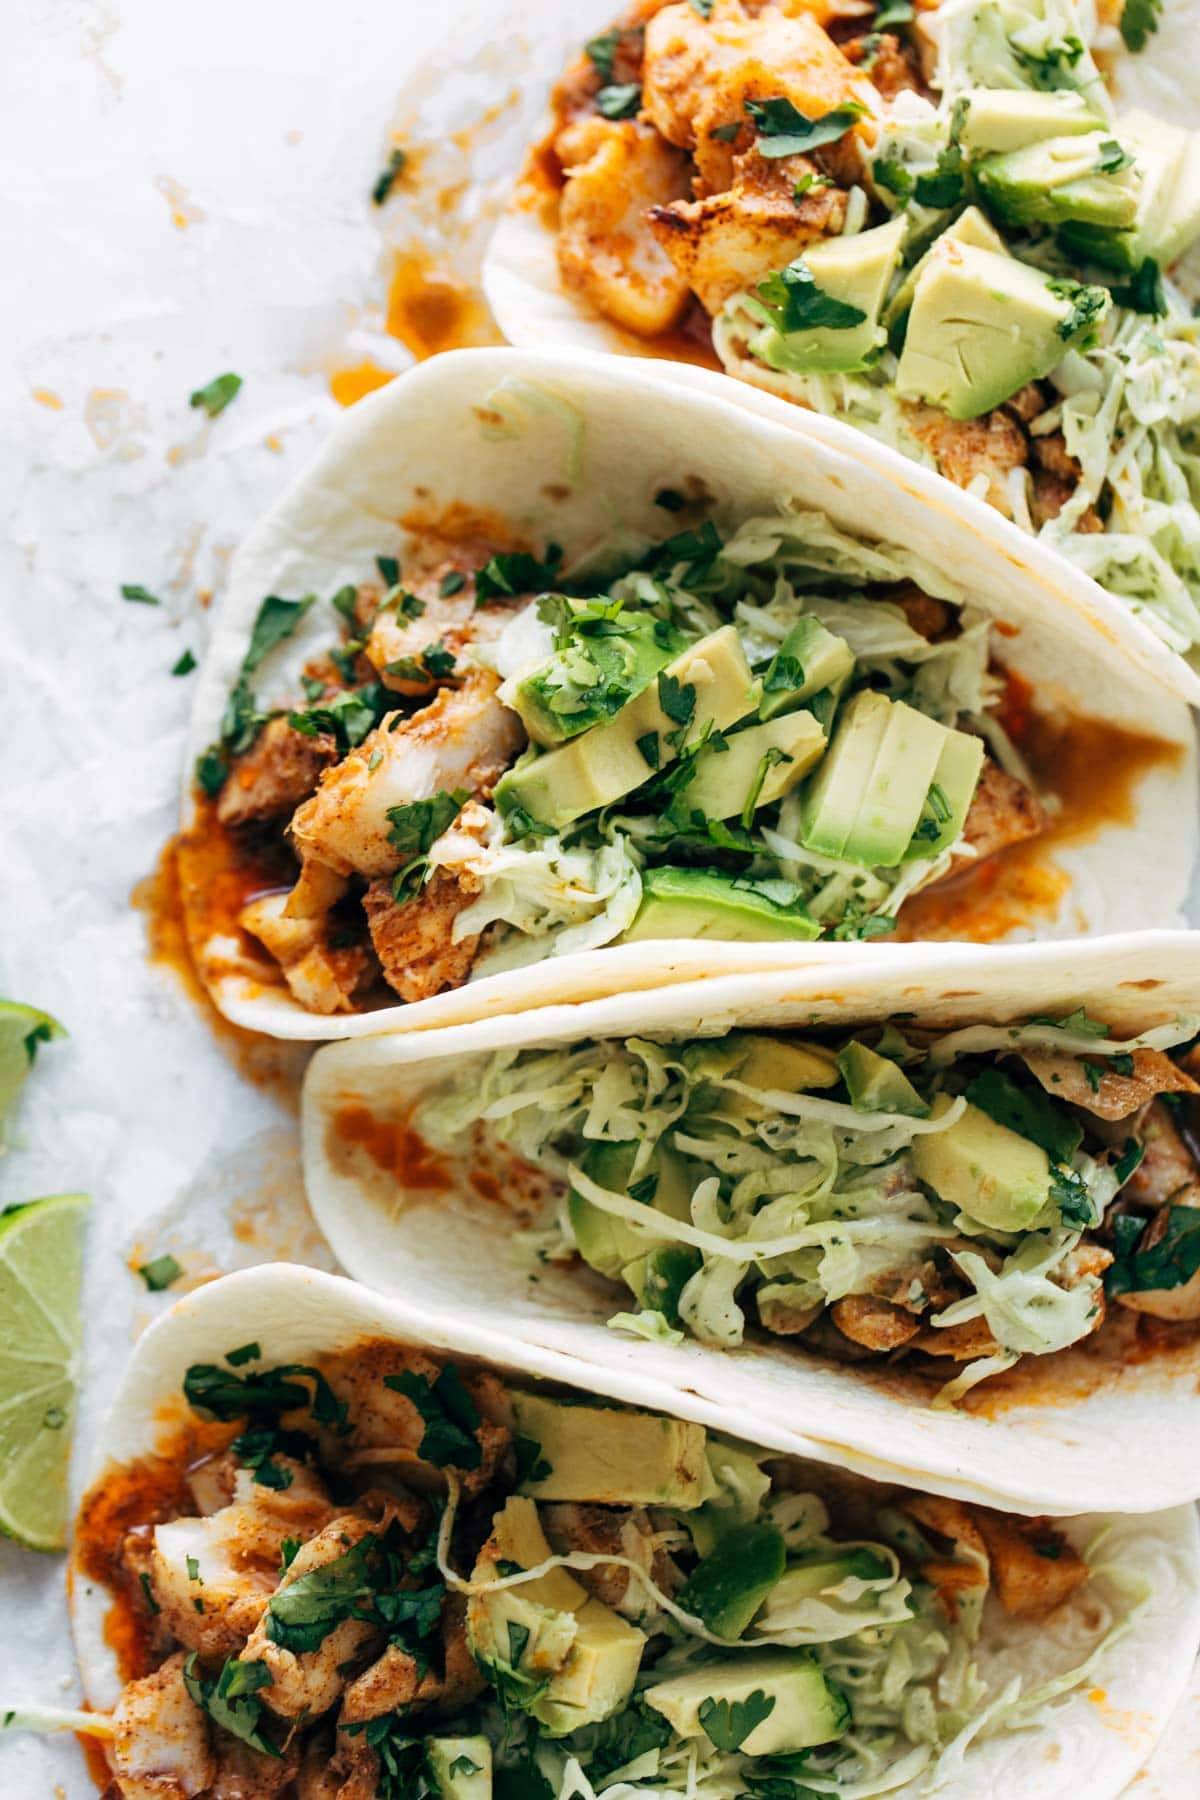 Fish tacos with sauce and diced avocados in them.